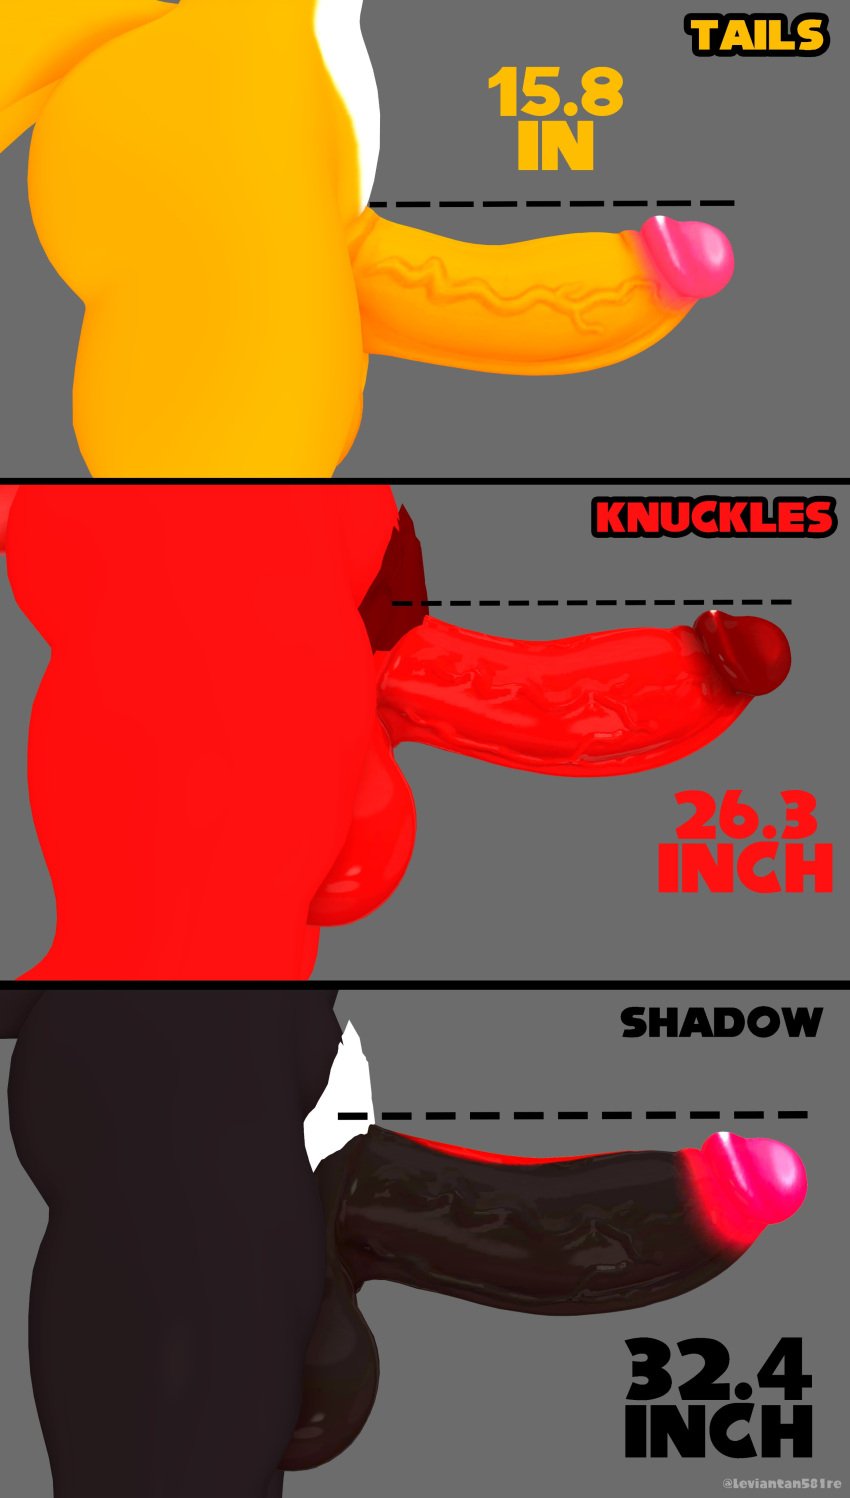 3boys comparing comparing_penis comparing_sizes knuckles_the_echidna leviantan581re male_only penis_size_difference shadow_the_hedgehog sonic_(series) sonic_the_hedgehog_(series) tails_the_fox